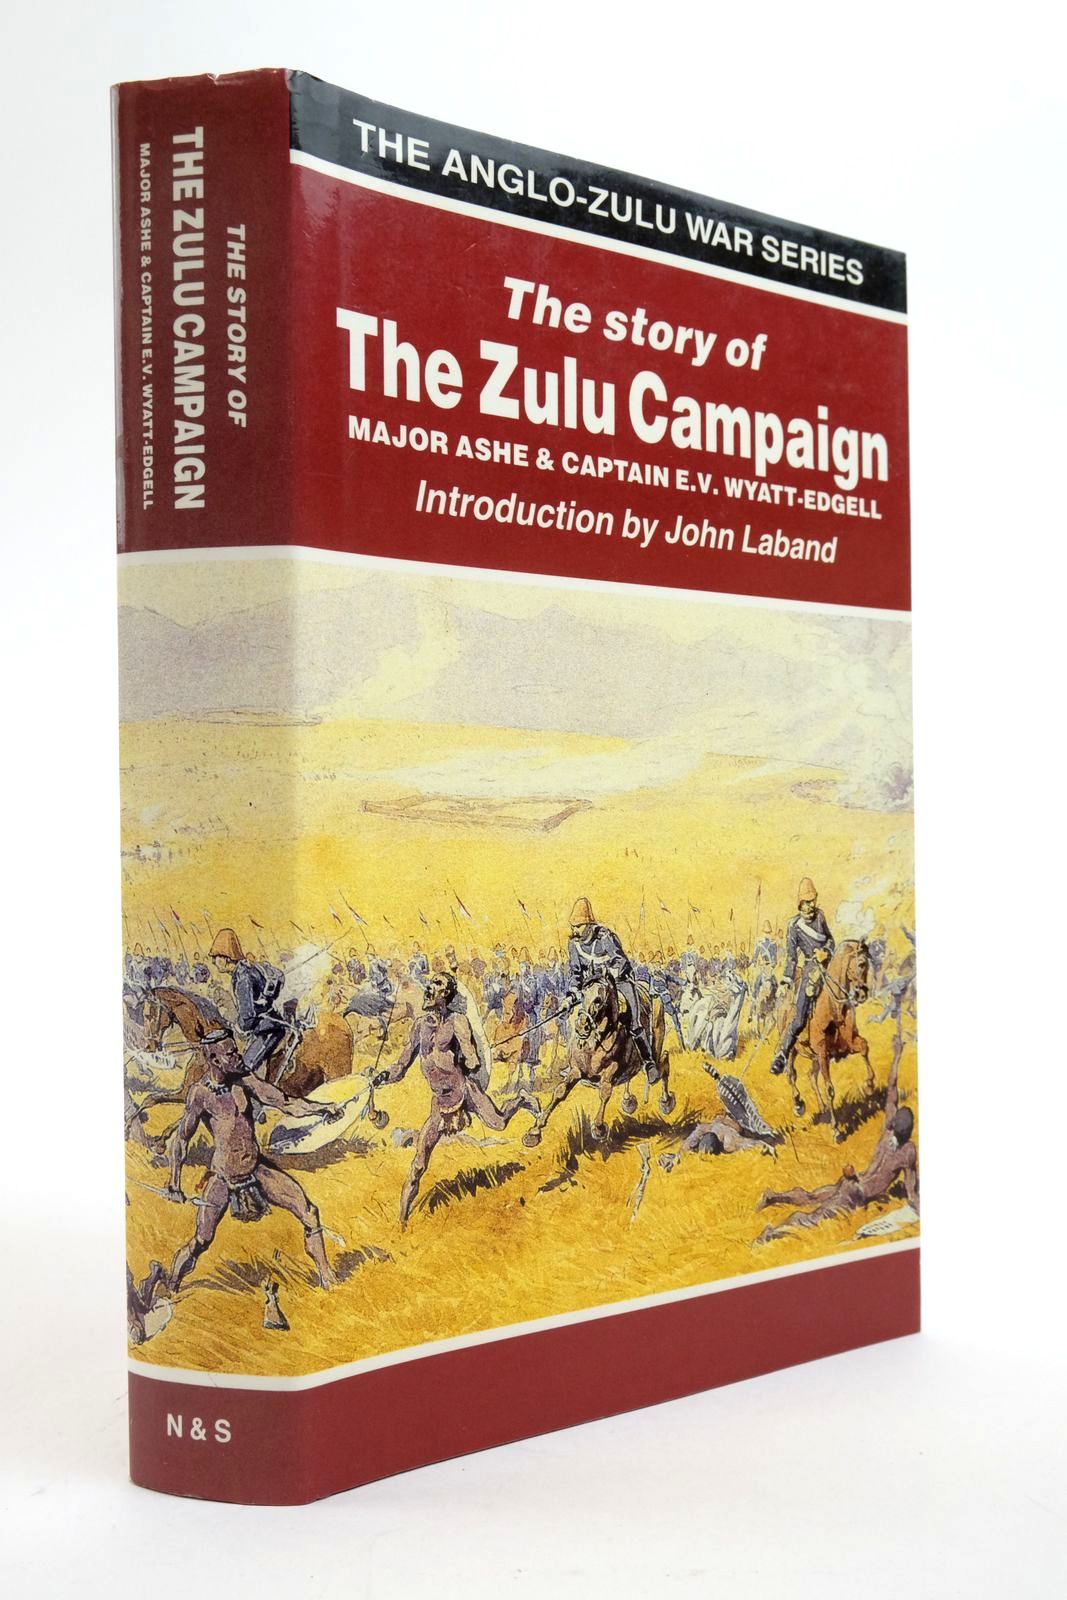 Photo of THE STORY OF THE ZULU CAMPAIGN written by Ashe, Waller
Wyatt-Edgell, E.V. published by N. & S. Press (STOCK CODE: 2138556)  for sale by Stella & Rose's Books